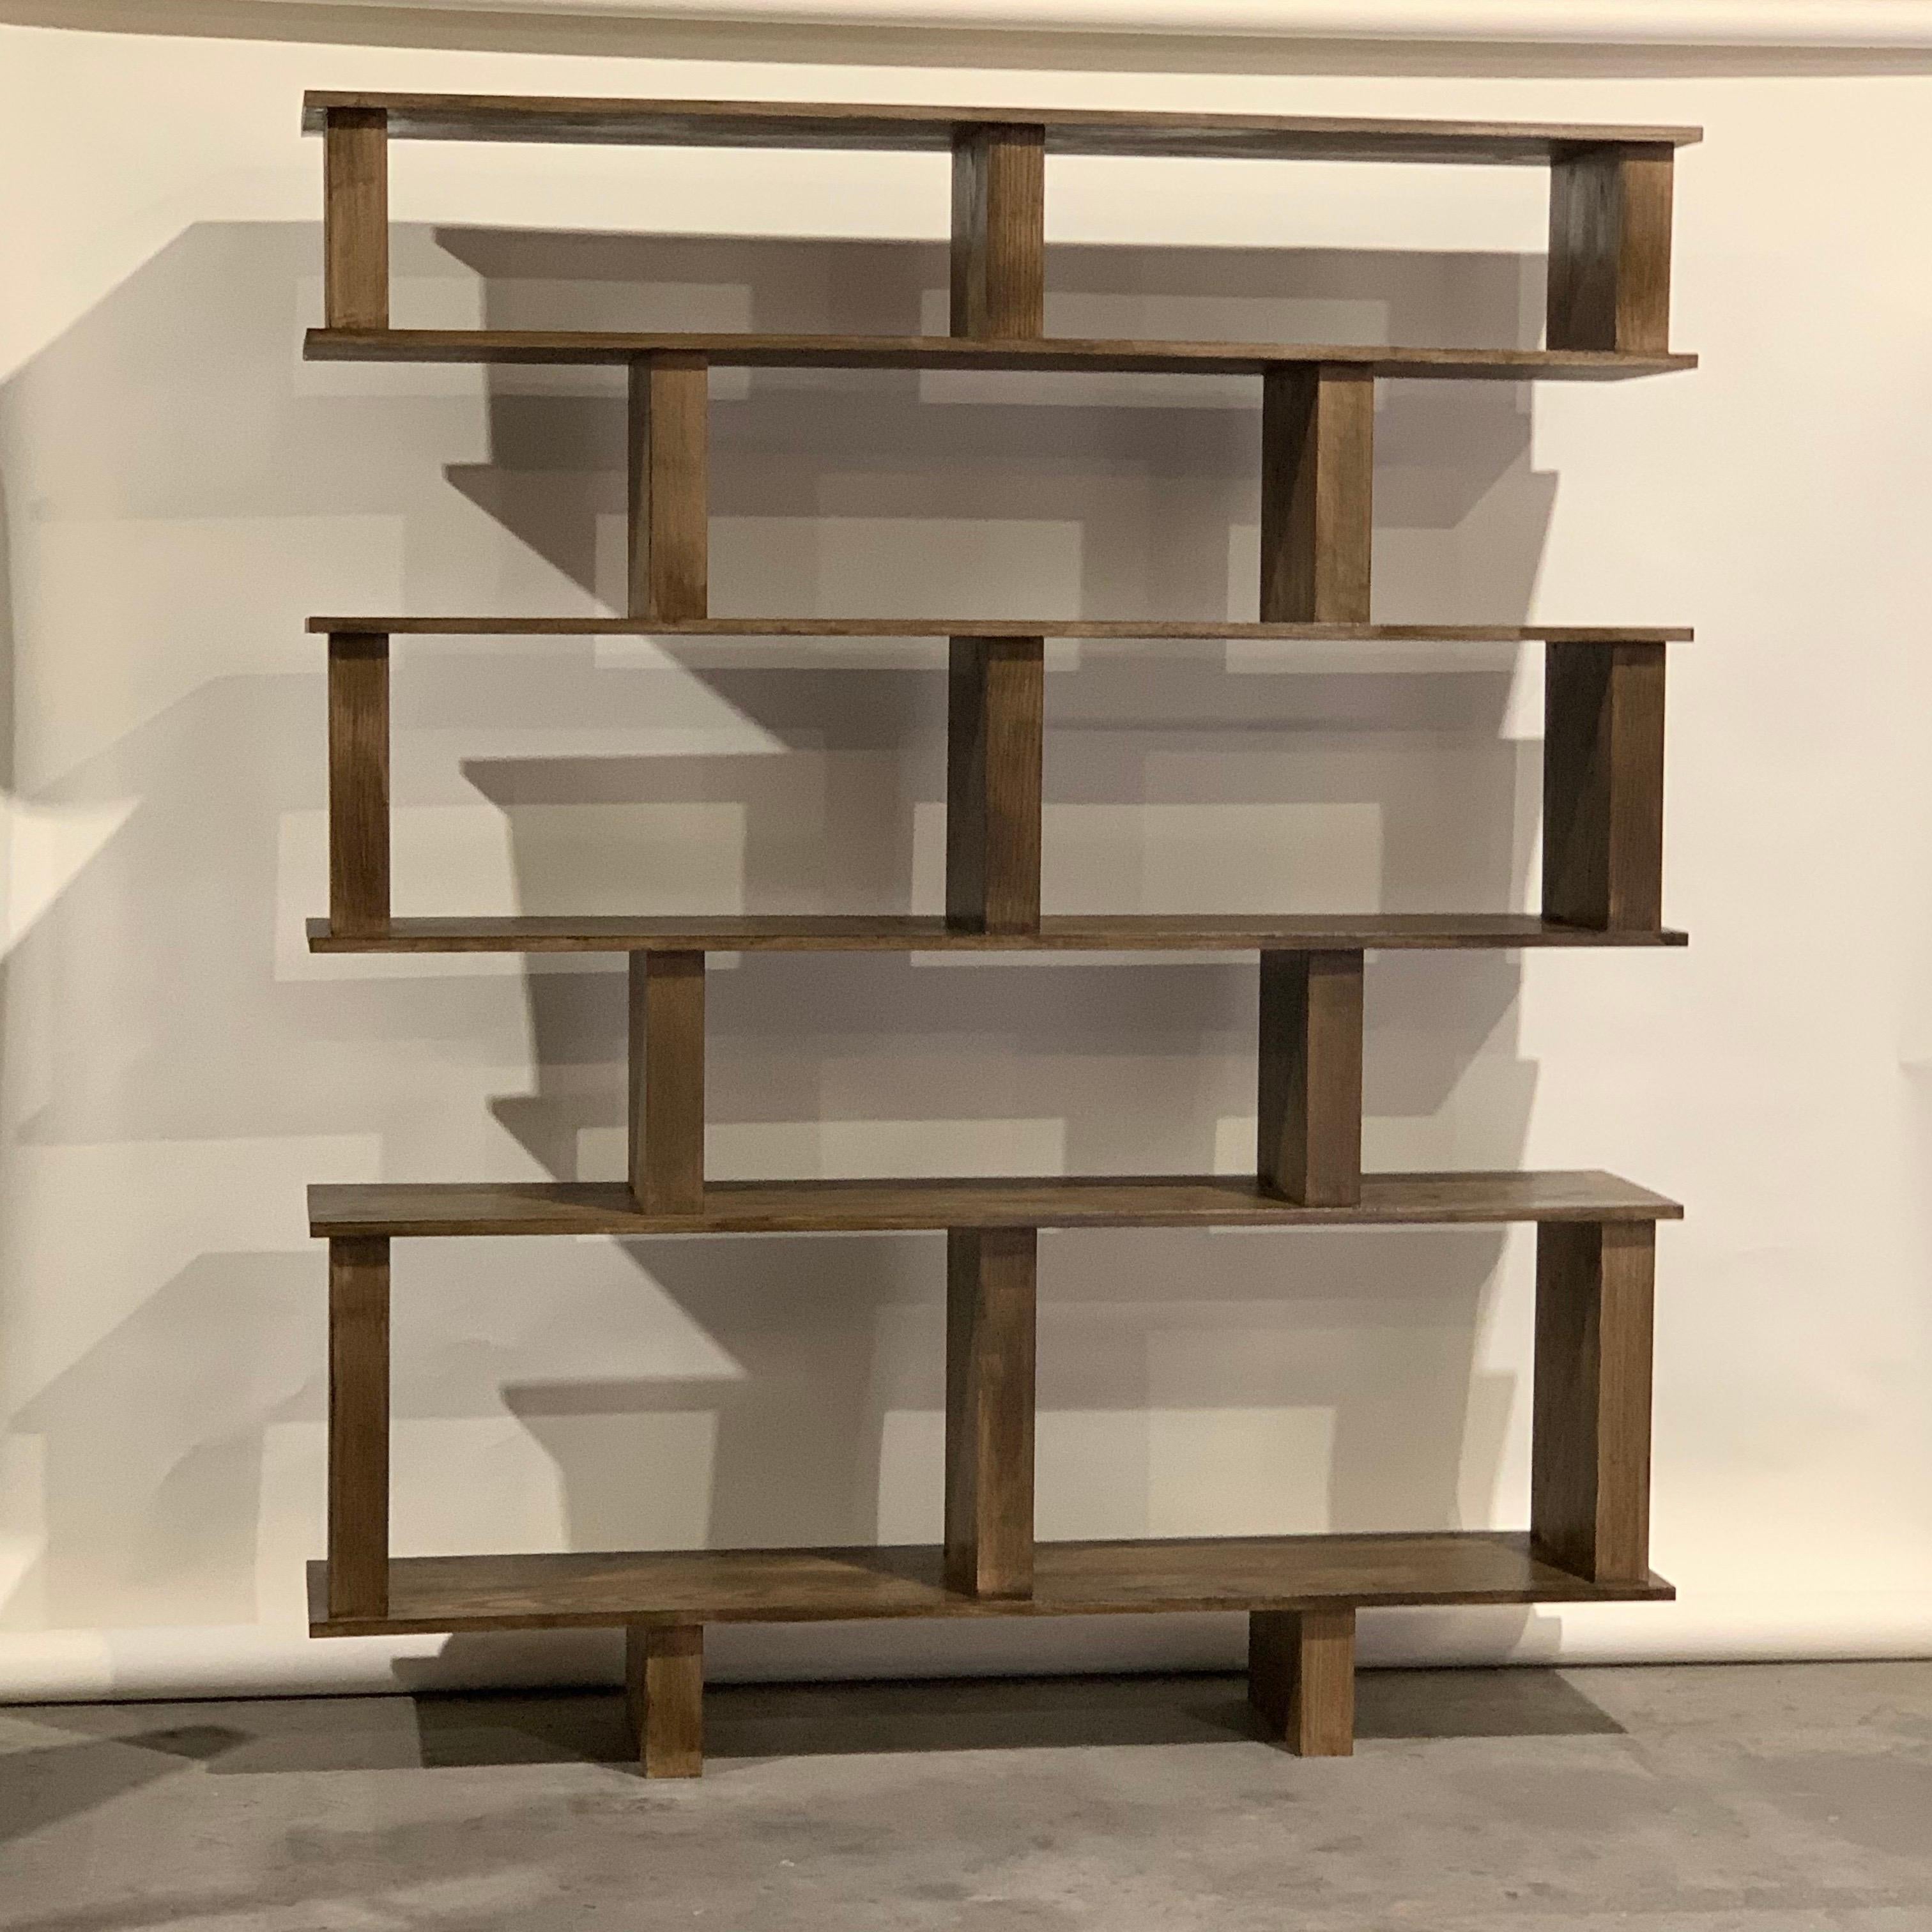 Solid stained red oak verticale shelving unit by Design Frères. Comes in 3 easy to transport and assemble elements.